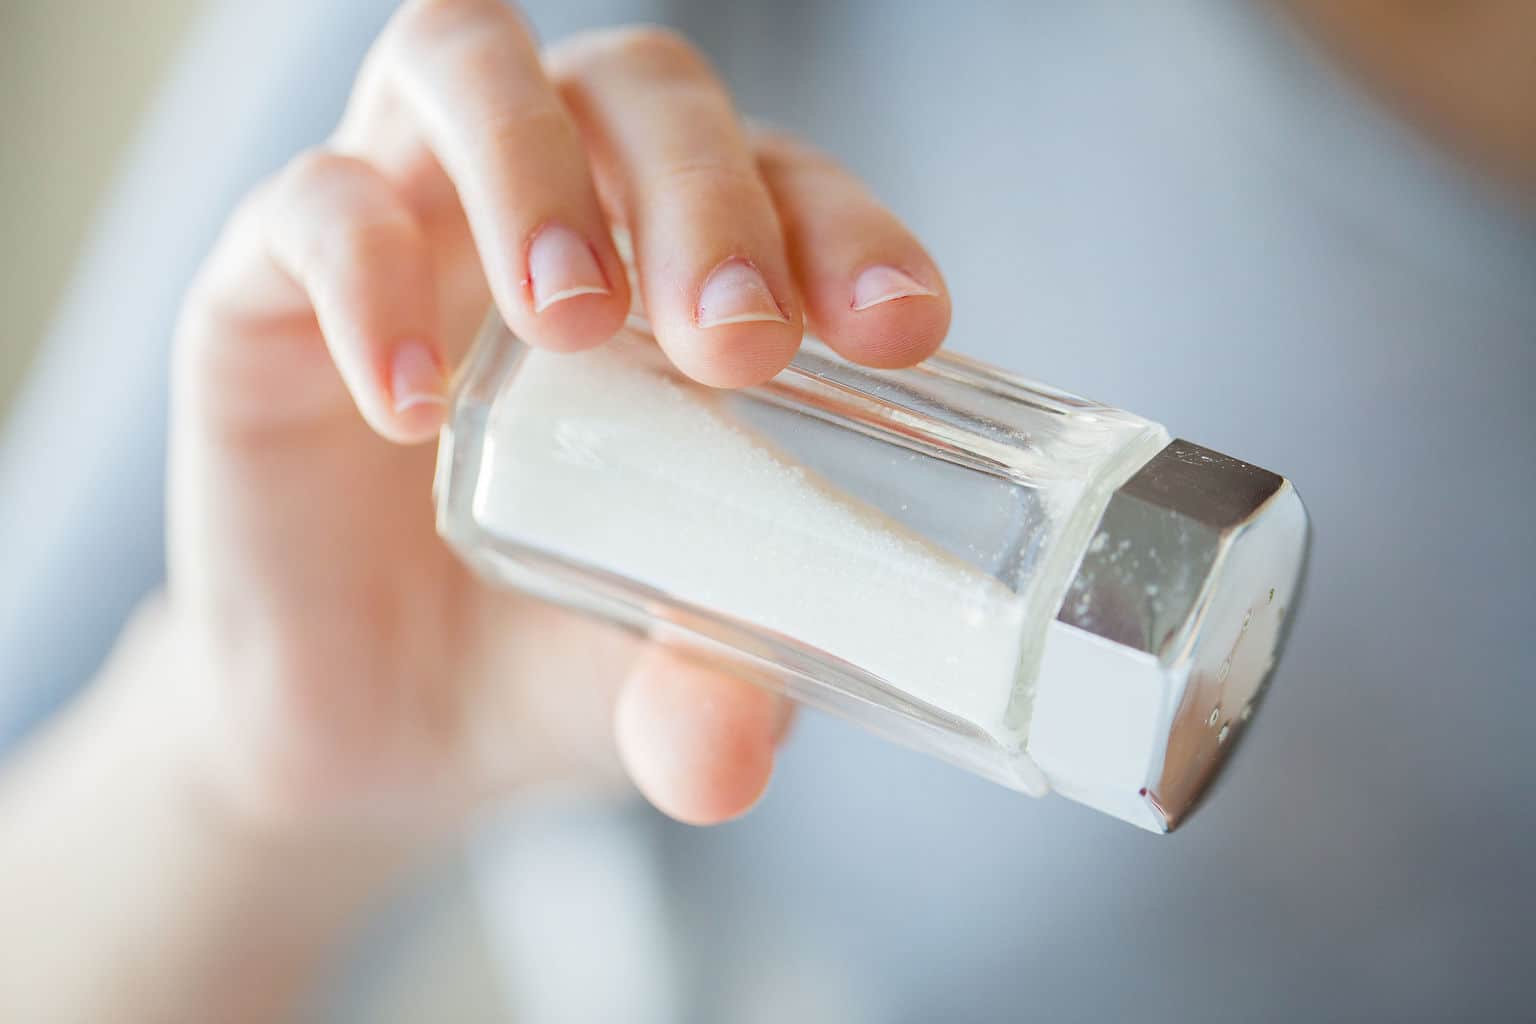 Restricting salt hurts your penis and doesn't lower blood pressure